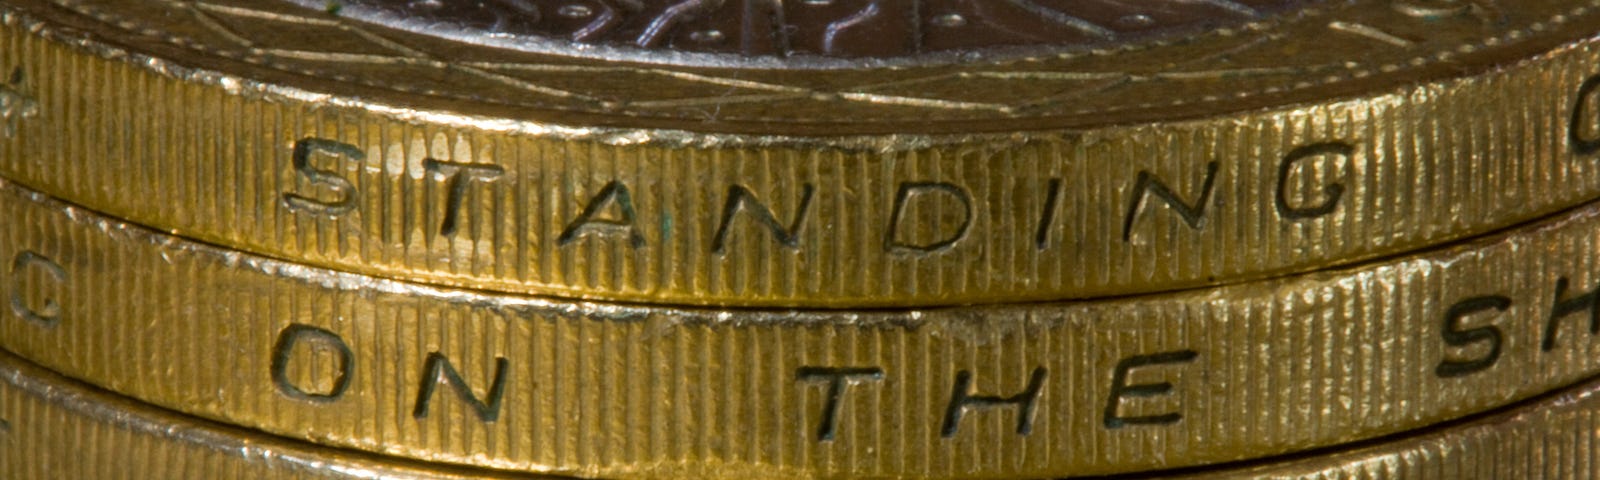 The UK £2 coin has the phrase inscribed into the edge. © Brian Prout